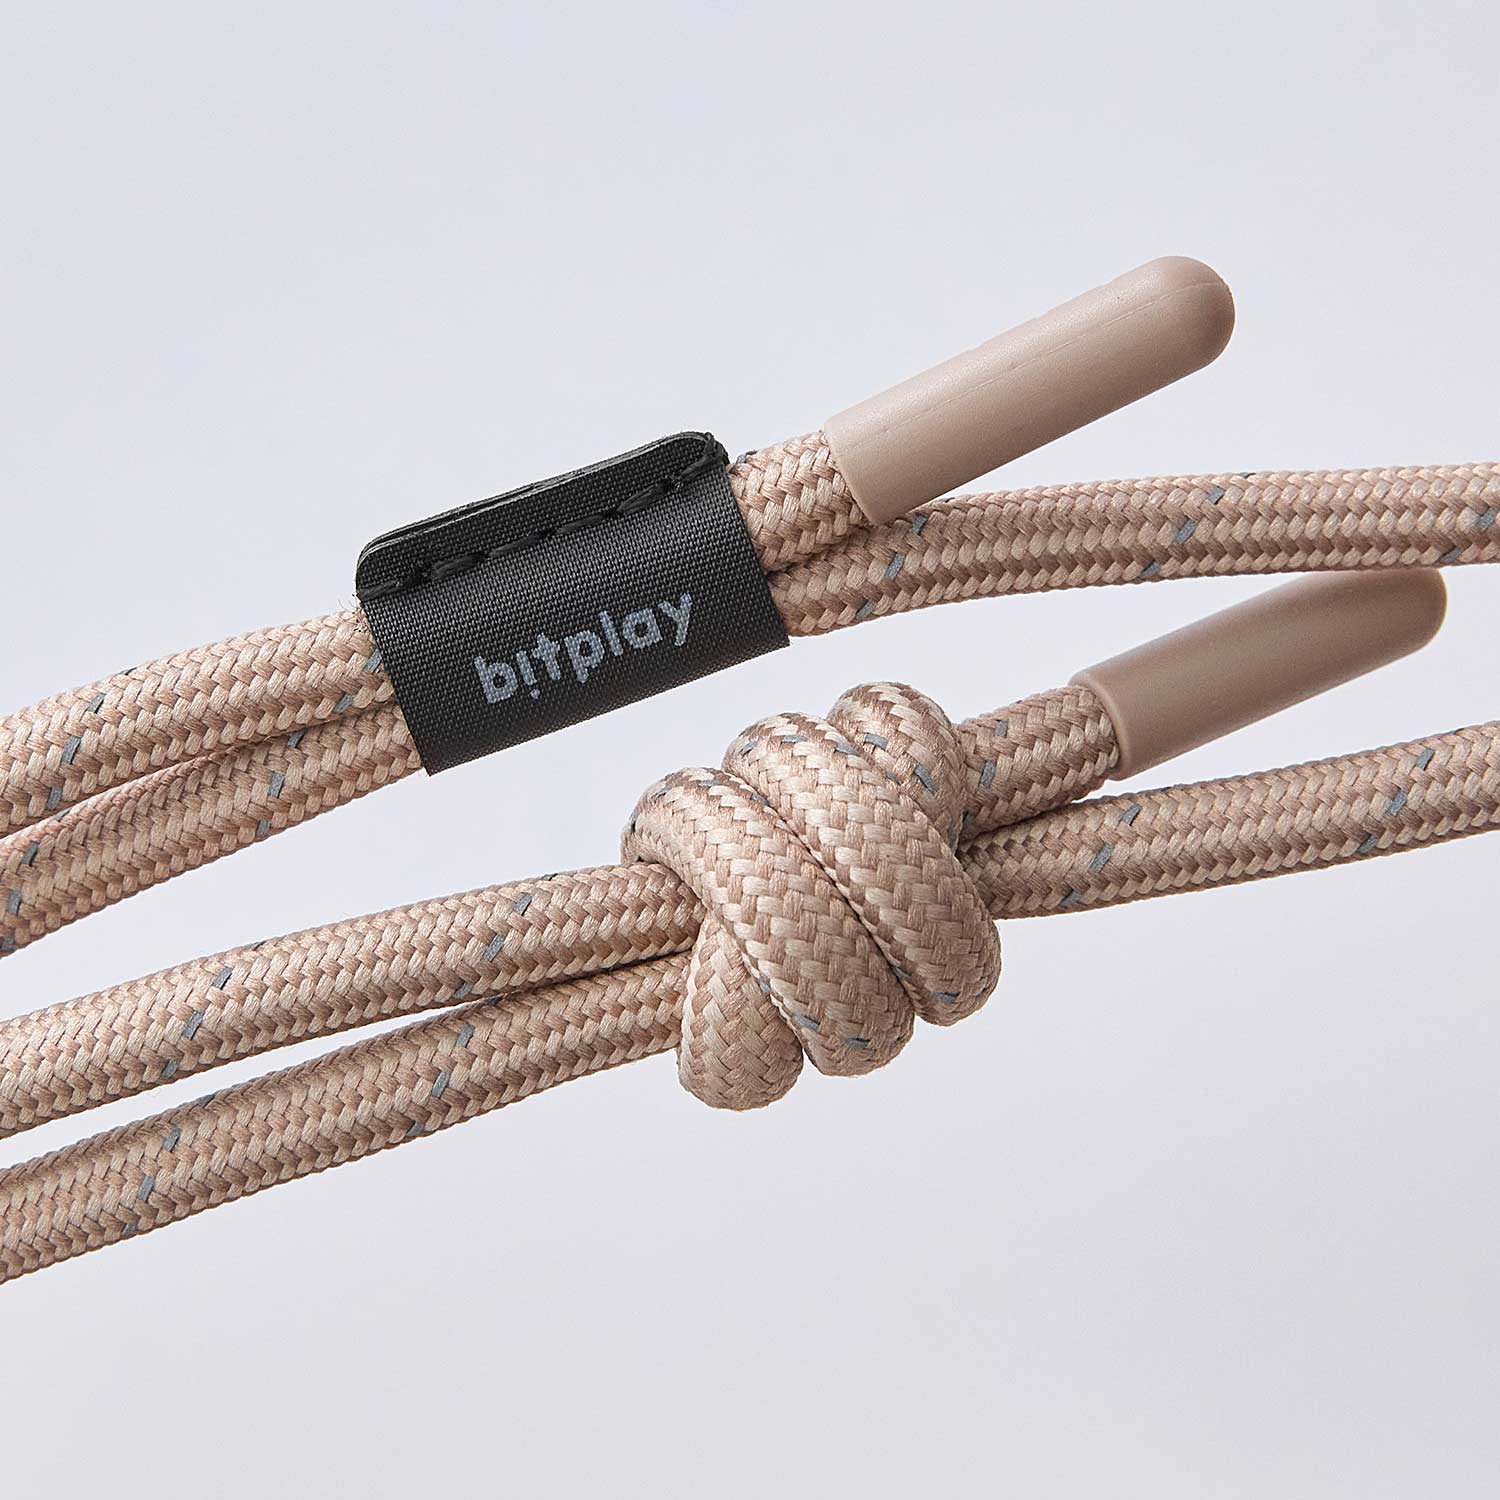 6mm Lite Strap - Oatmeal Tan (Strap Adapter included）